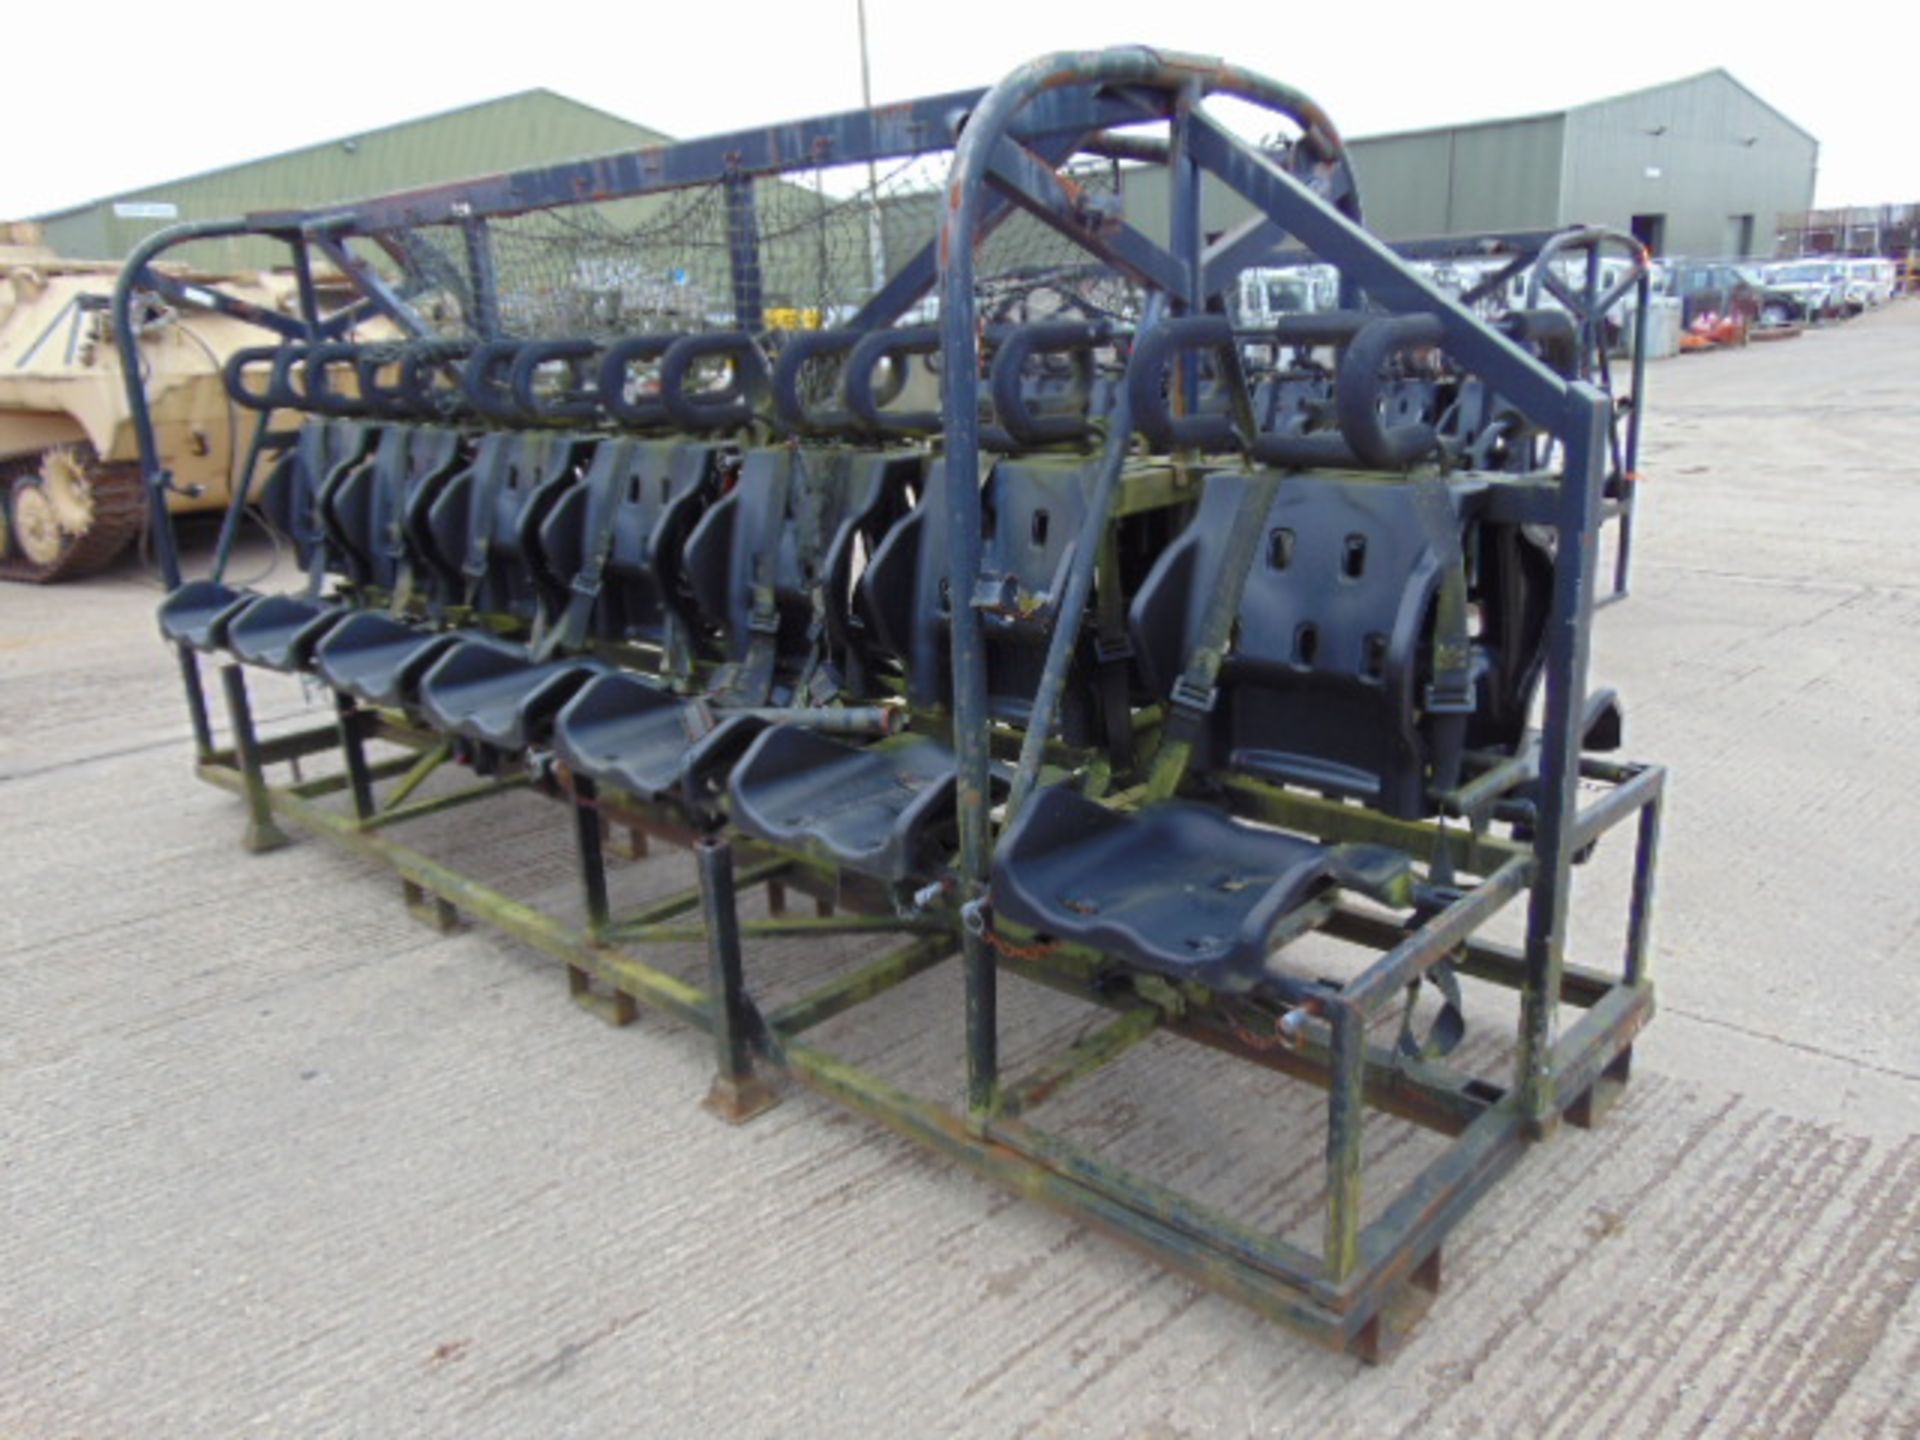 14 Man ROPS Security Seat suitable for Leyland Dafs, Bedfords etc - Image 5 of 5